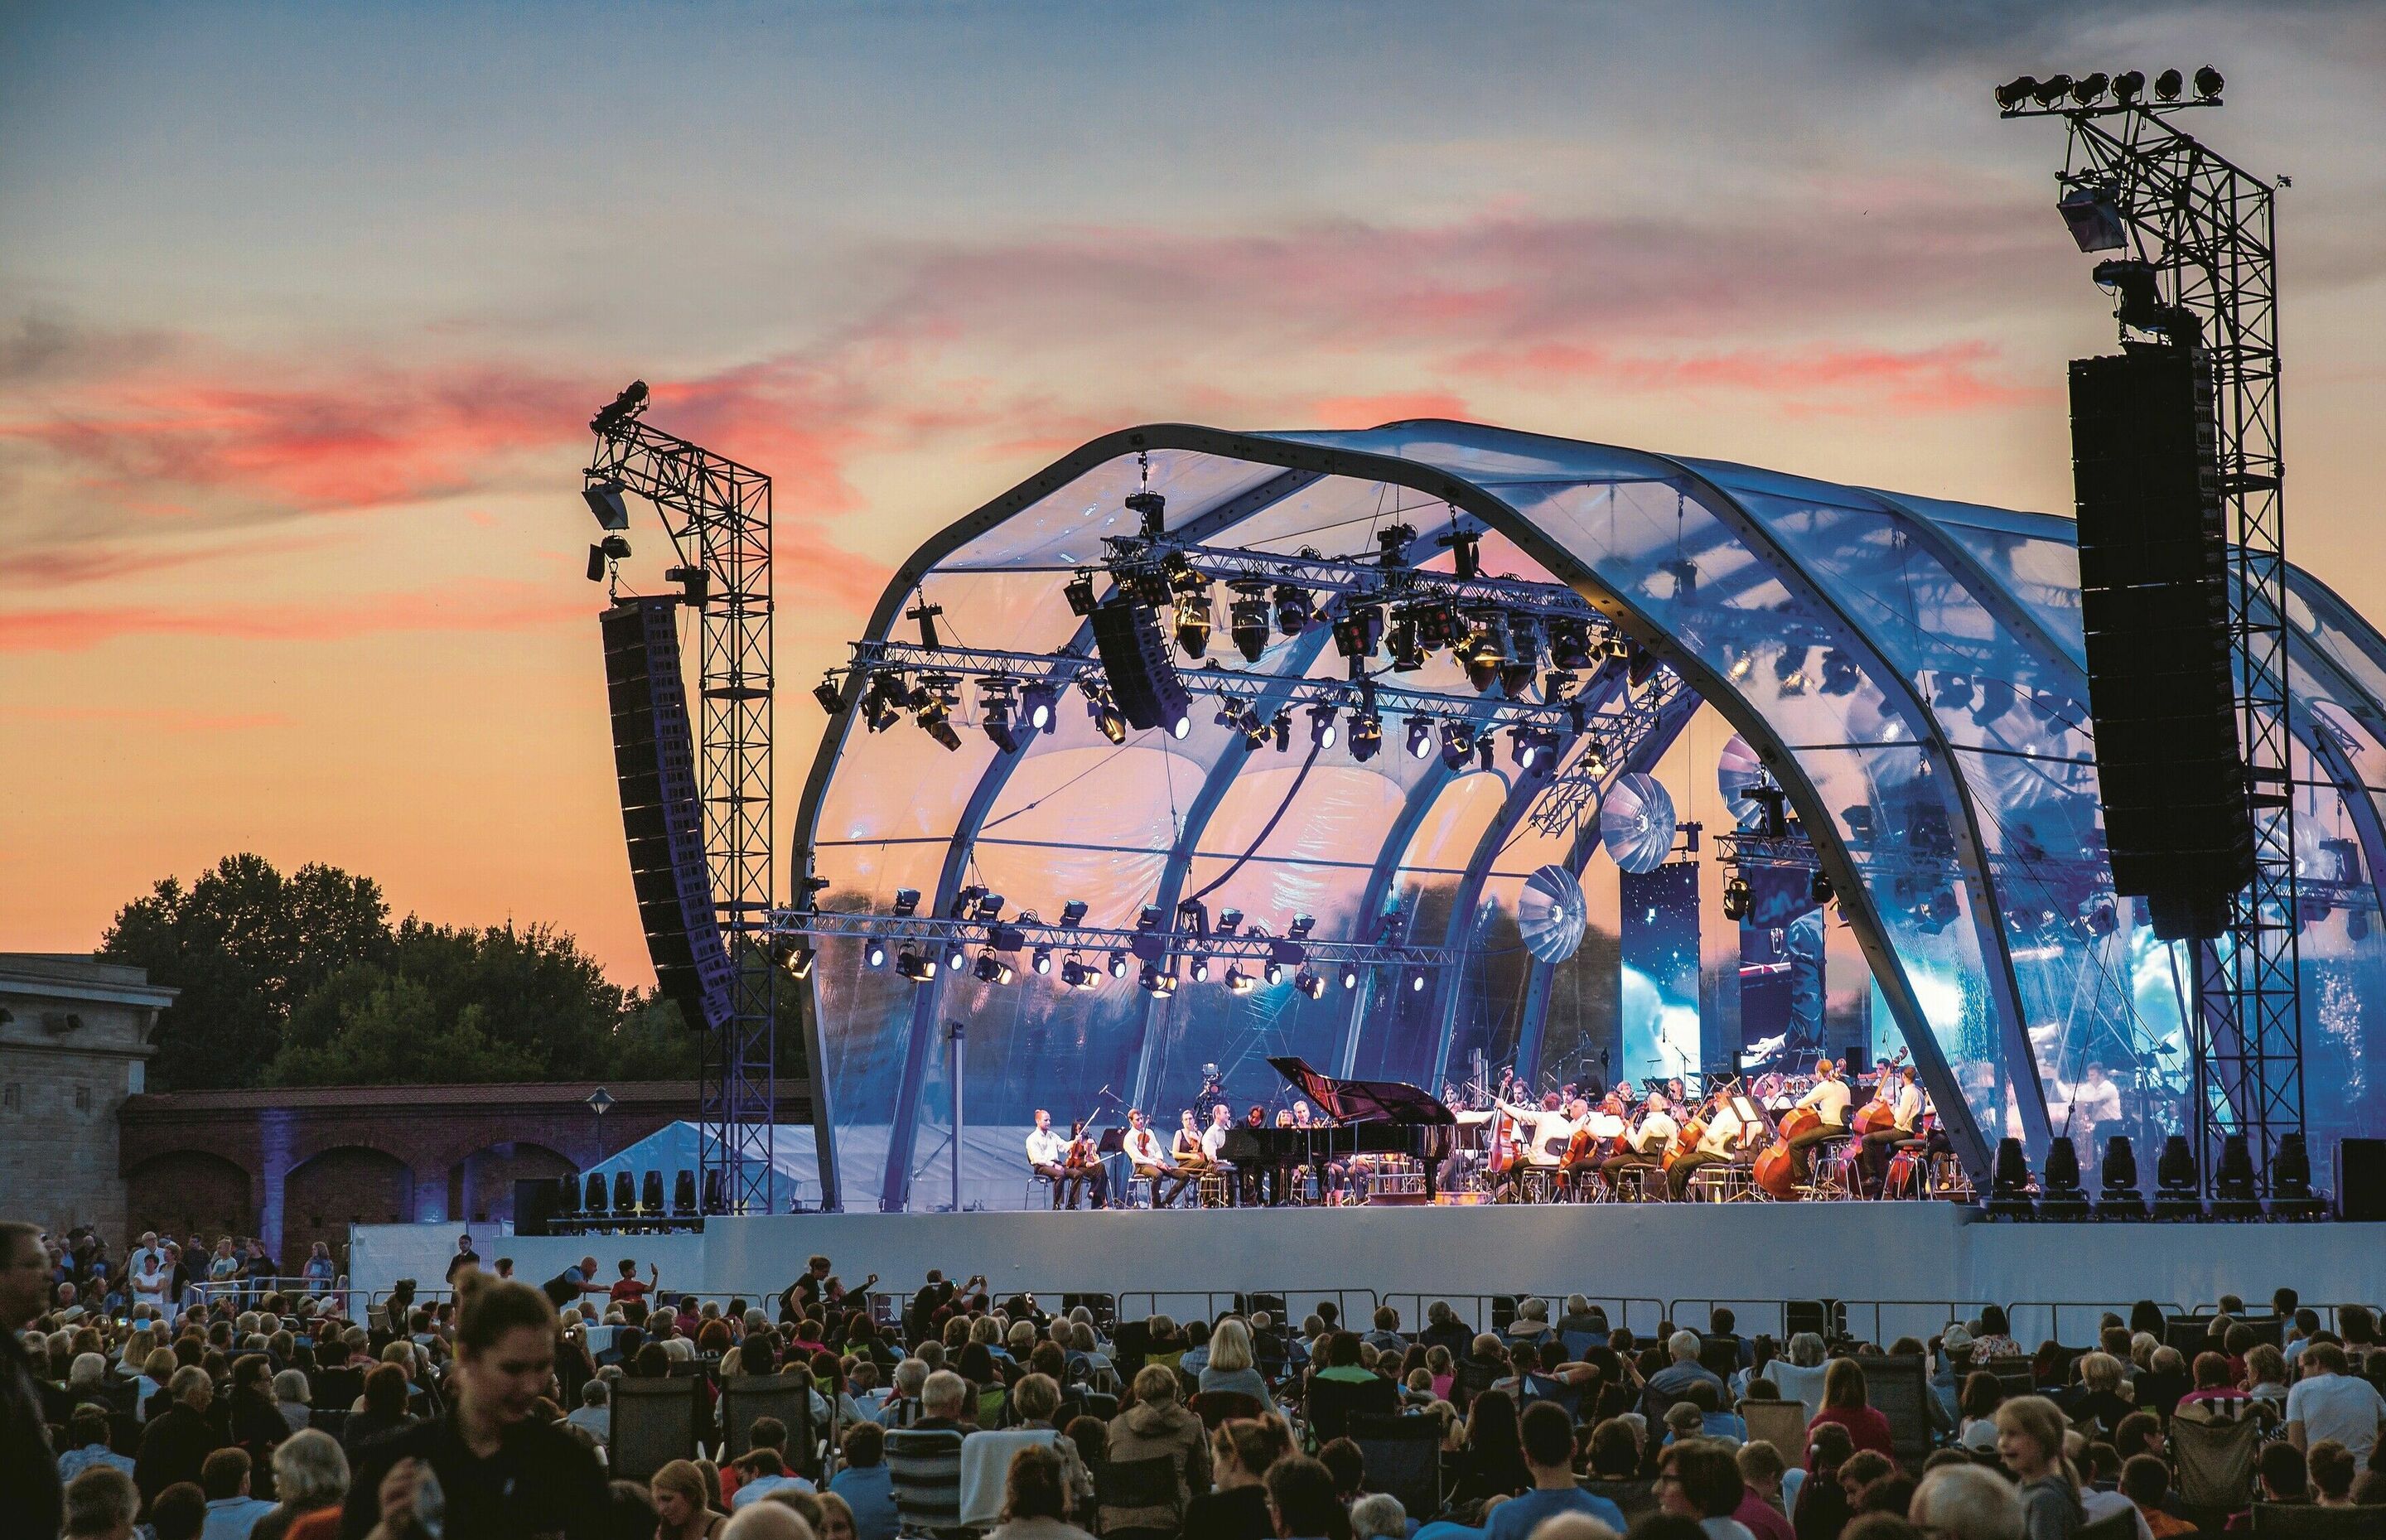 Audi Summer Concerts: All ticket sales to be donated to help Ukraine